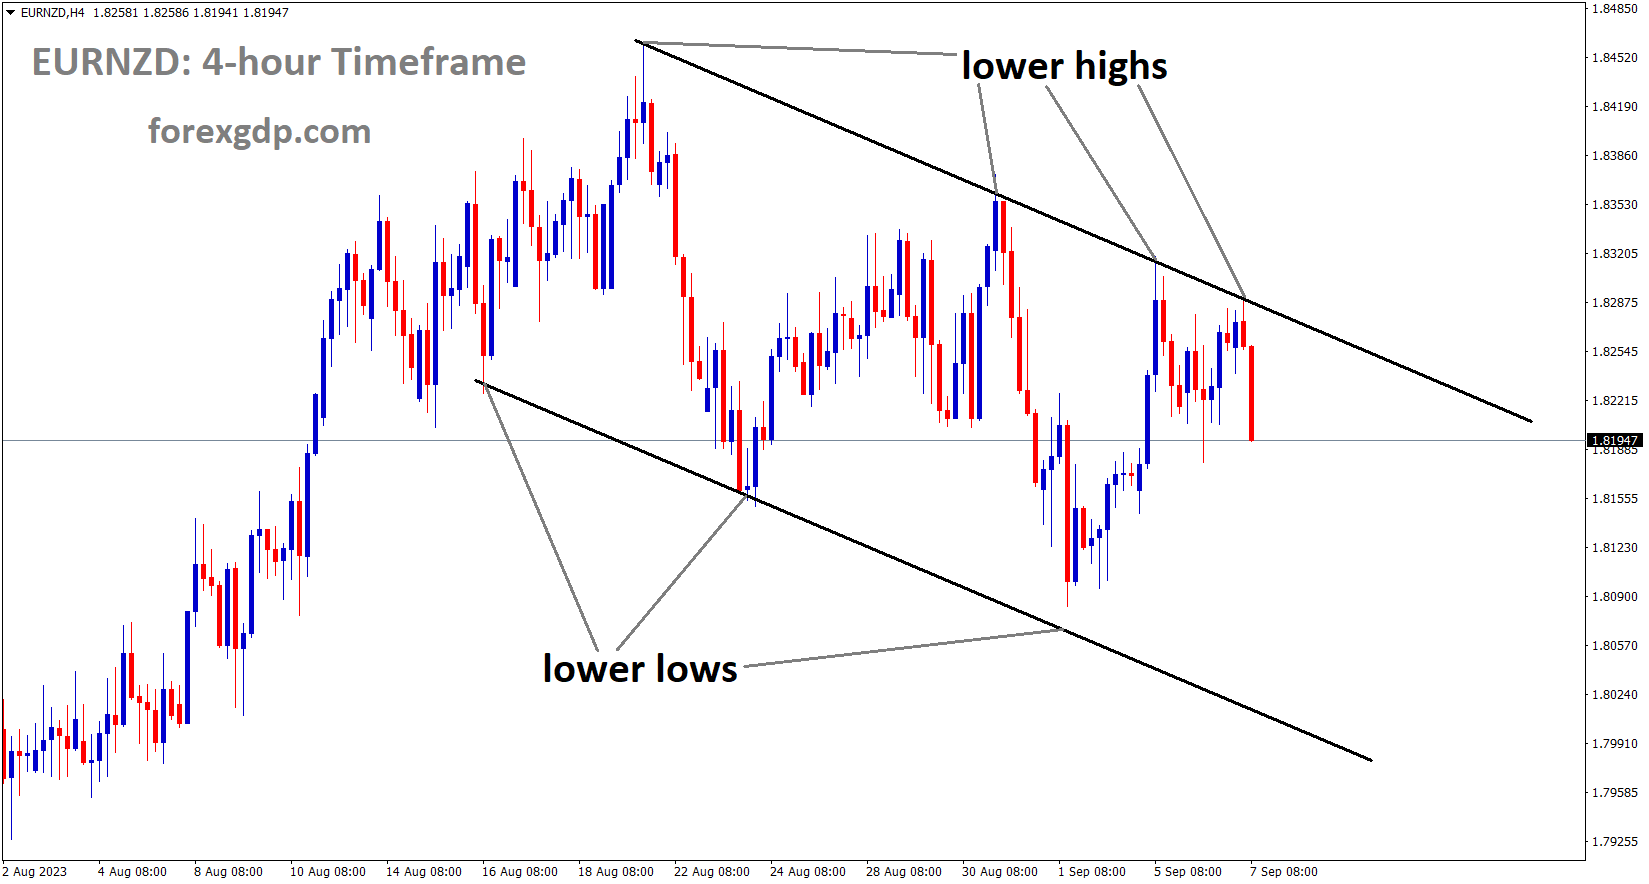 EURNZD is moving in the Descending channel and the market has fallen from the lower high area of the channel